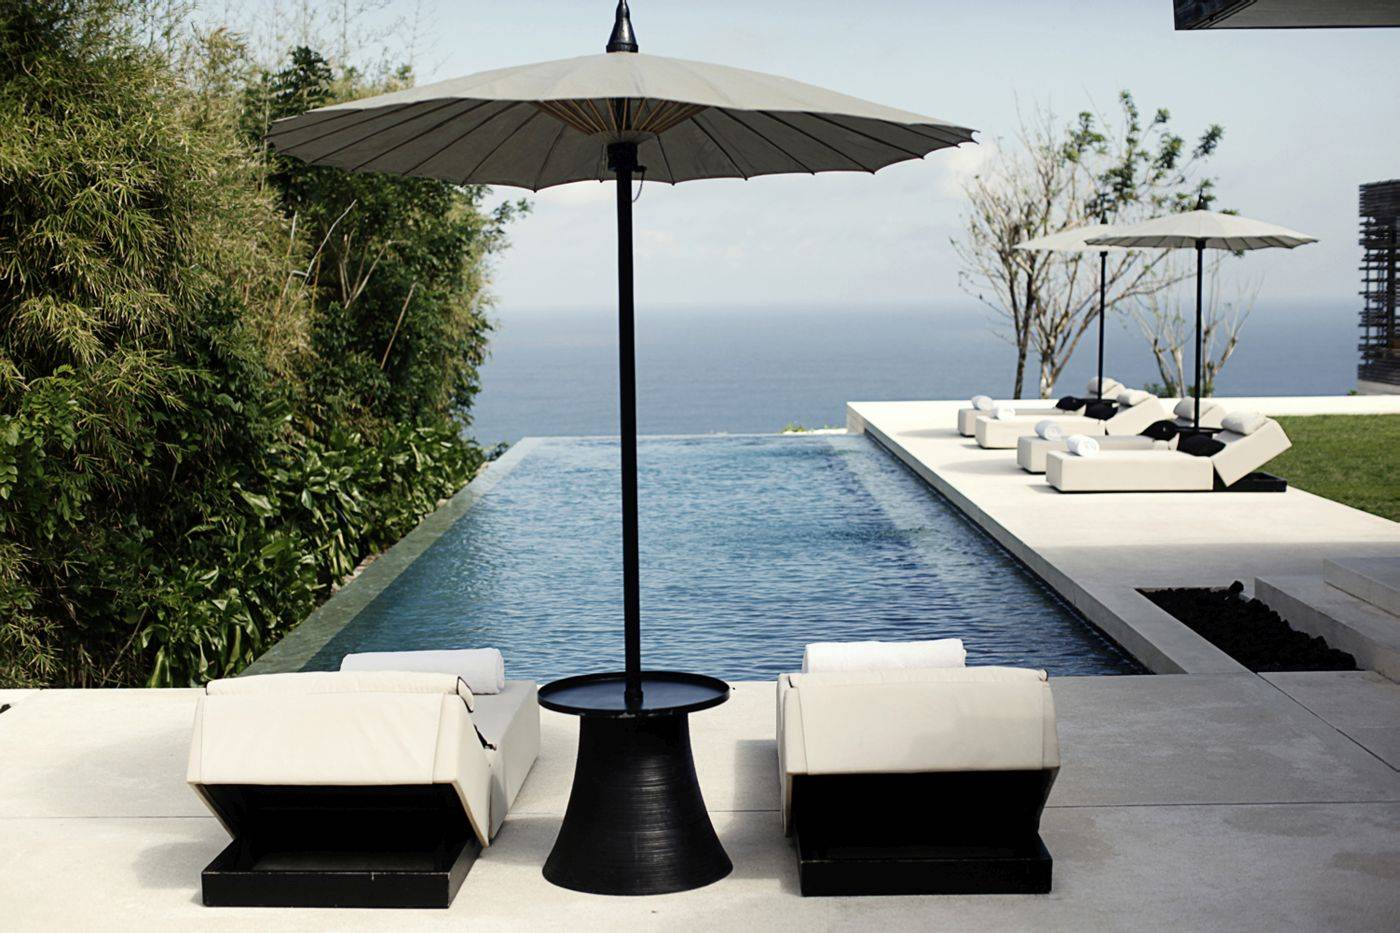 Alila villas uluwatu review: what to really expect if you stay
alila villas uluwatu – oyster.com